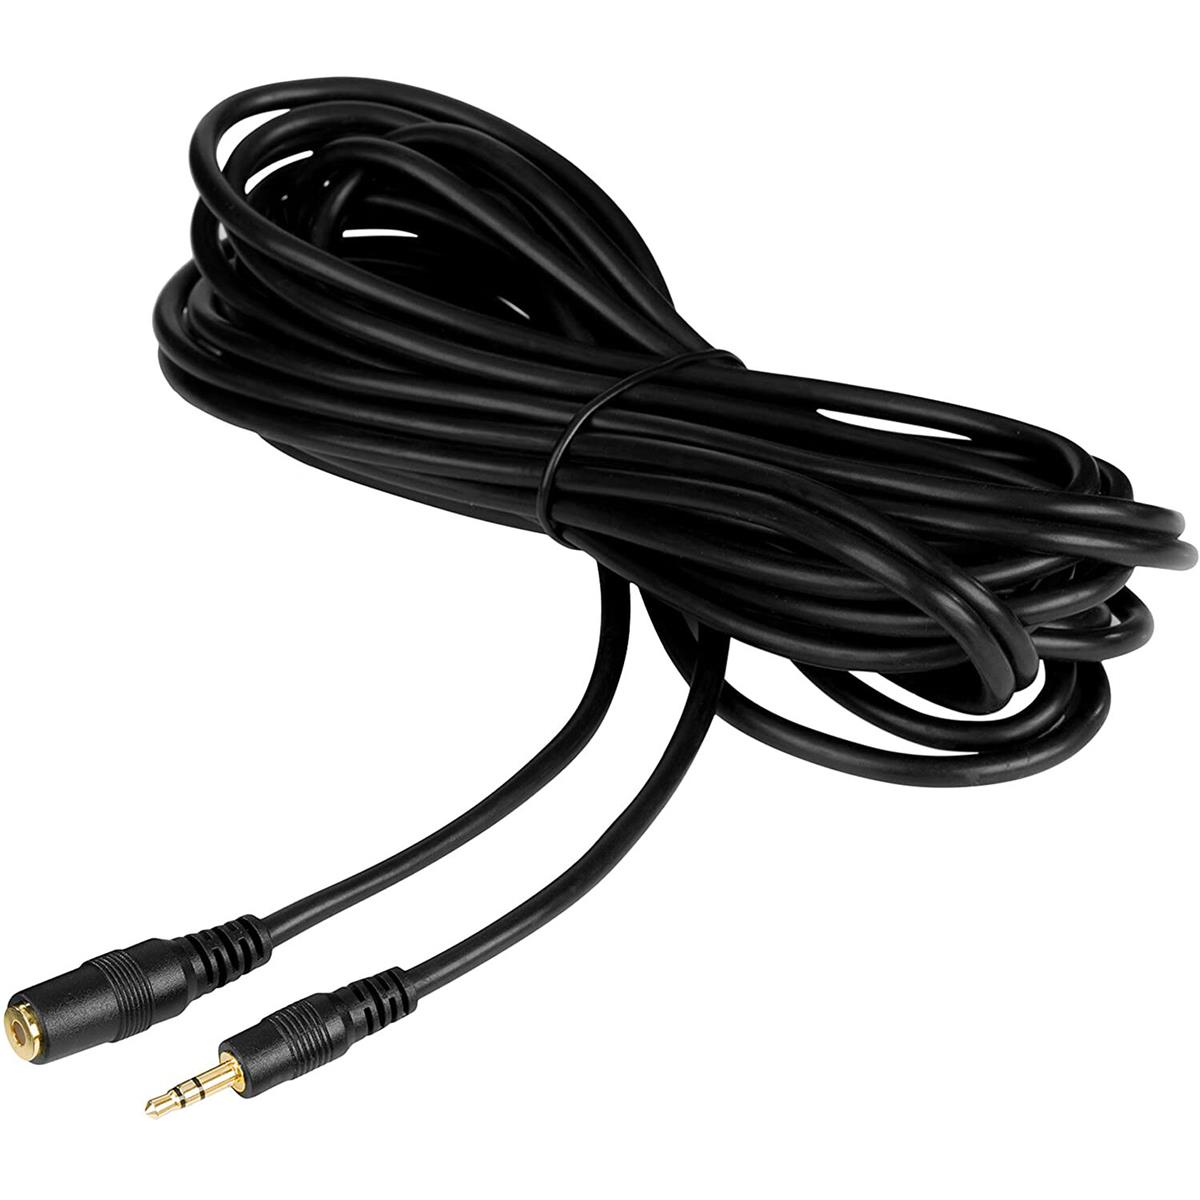 Image of Movo Photo MC20 3.5mm TRS Female to Male Audio Extension Cable